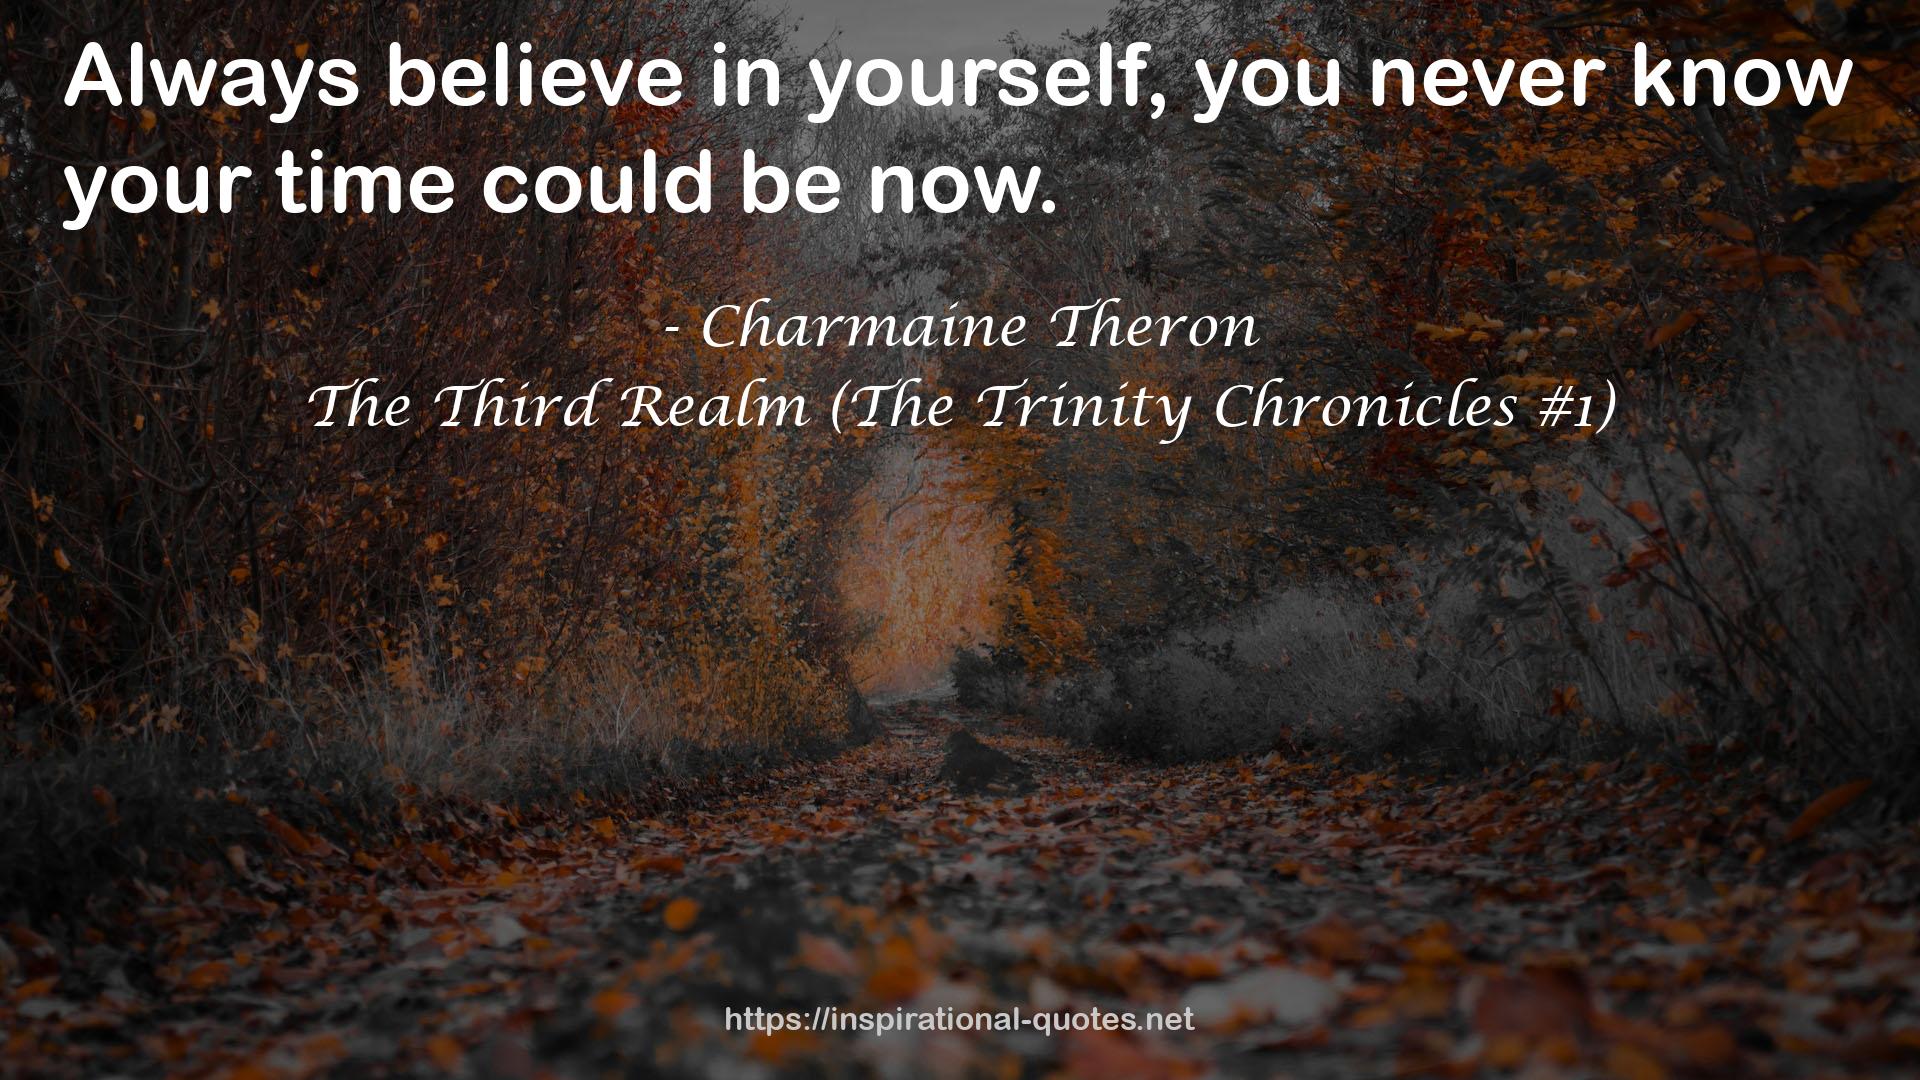 The Third Realm (The Trinity Chronicles #1) QUOTES